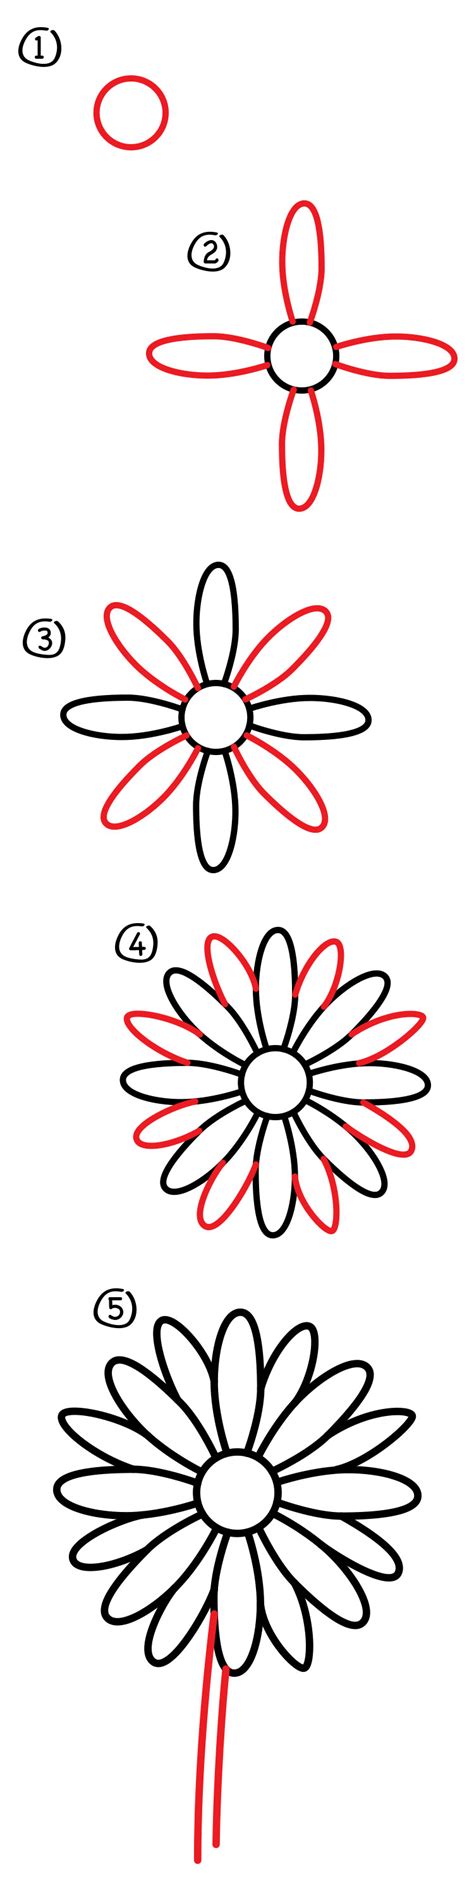 How to draw flowers for beginners step by step. How To Draw A Daisy Flower - Art For Kids Hub